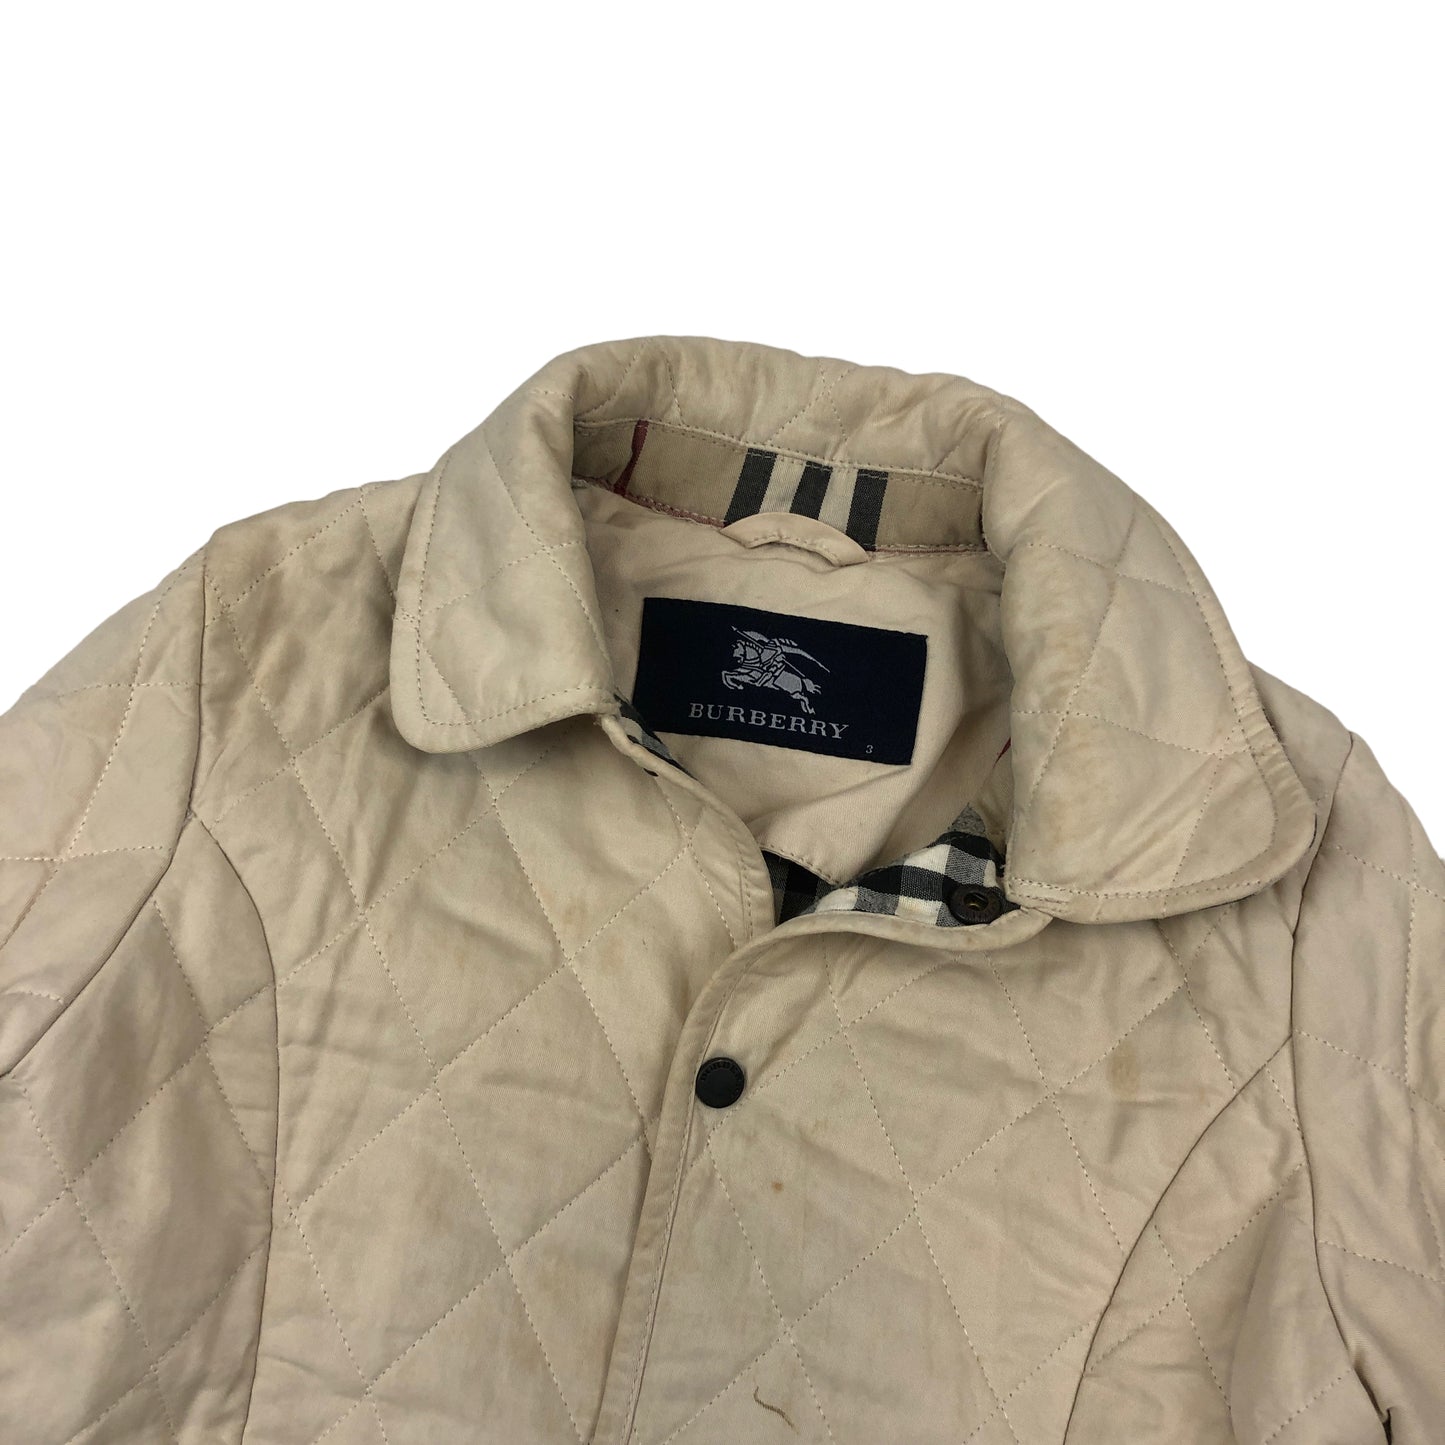 Vintage Burberry Quilted Jacket (Age 3)